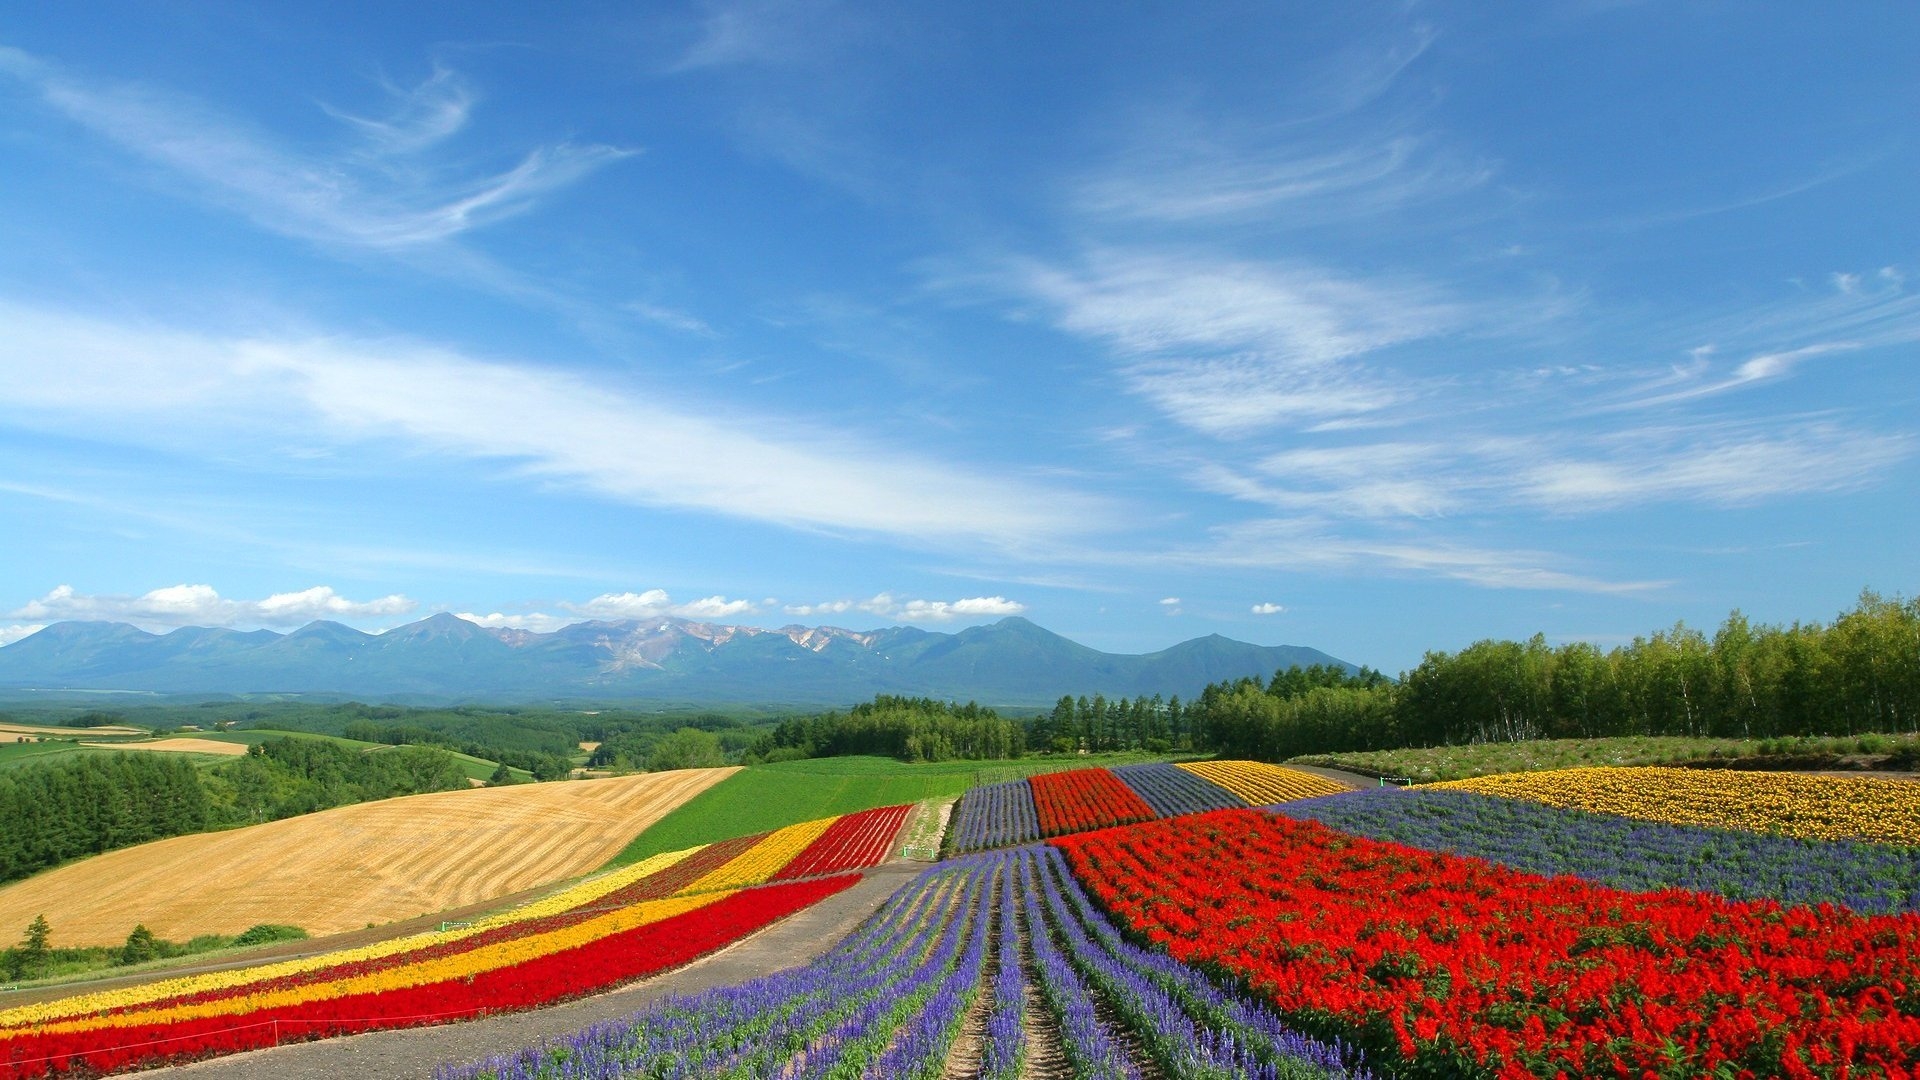 Colourful land for 1920 x 1080 HDTV 1080p resolution